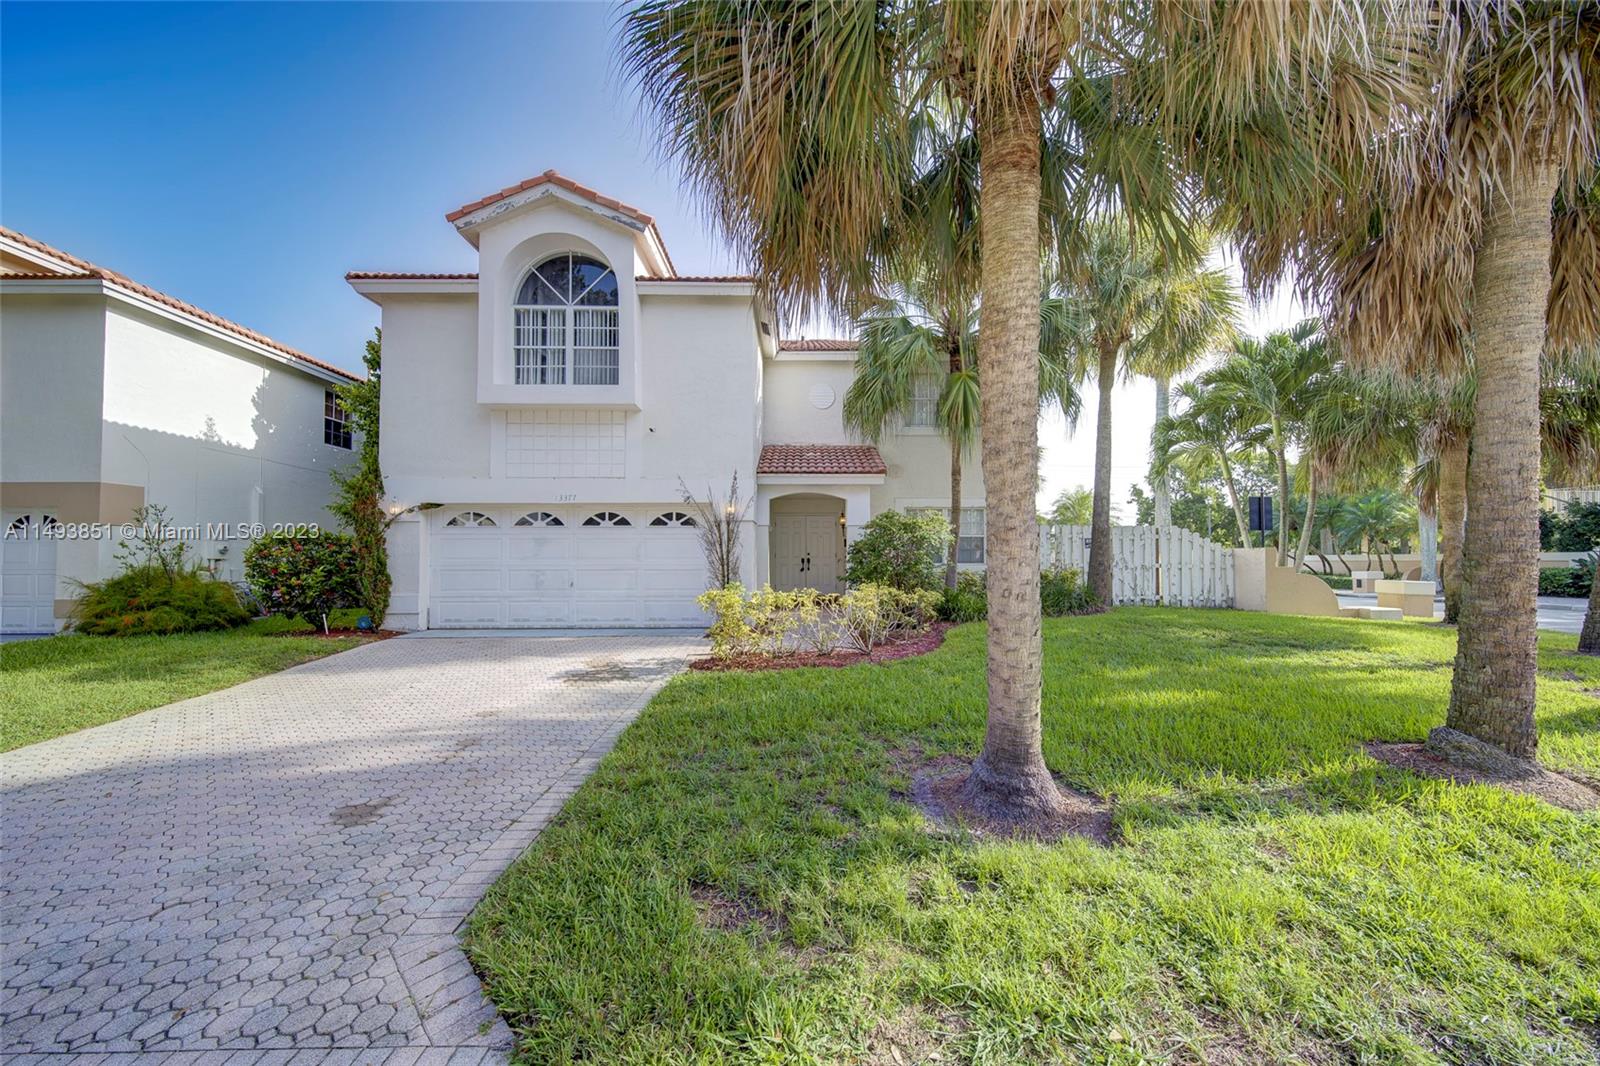 This stunning property is located in Plantation, FL. This exquisite 4-bedroom, 2.5-bathroom home is nestled on a
vast corner lot in a desirable neighborhood. The interior boasts a generous 2,622 sq. ft. of living space, creating
an atmosphere of grandeur and elegance. The layout is carefully crafted to prioritize comfort and functionality.
Please note that the home is currently dated and requires some updating.